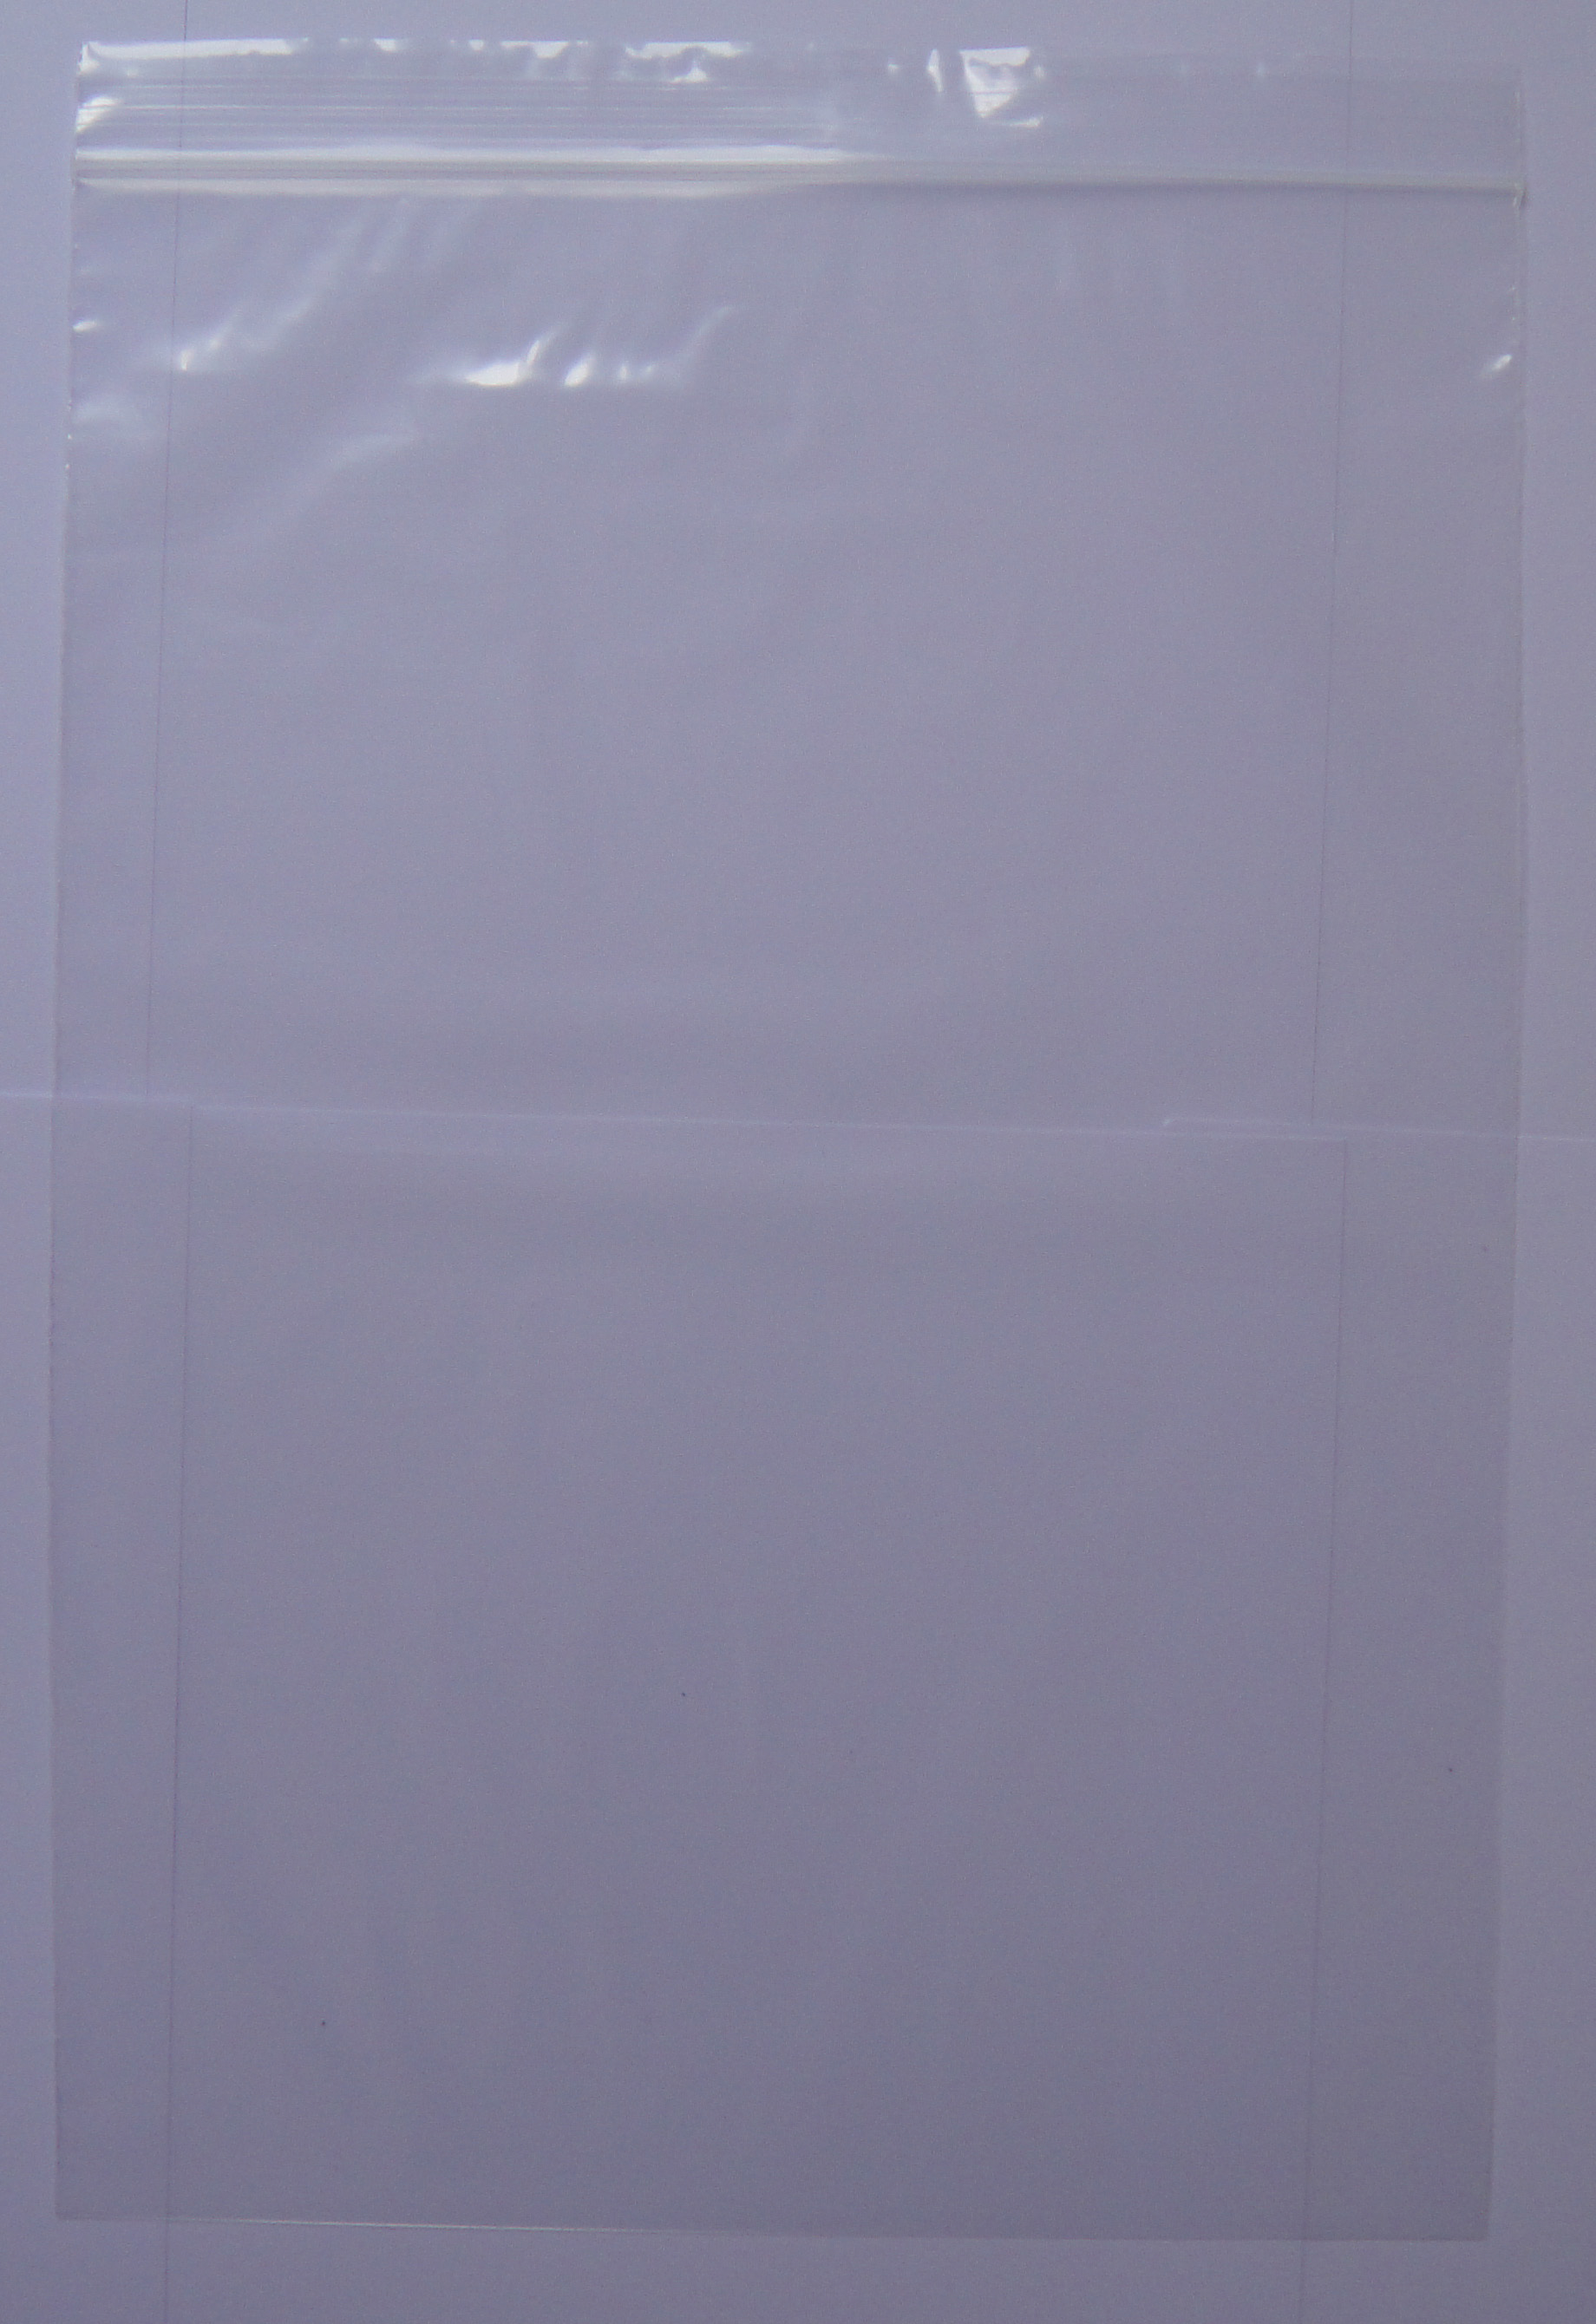 300 x GRIP SEAL BAGS Zip Self Resealable Clear Polythene Poly Plastic 3.5"x4.5" 